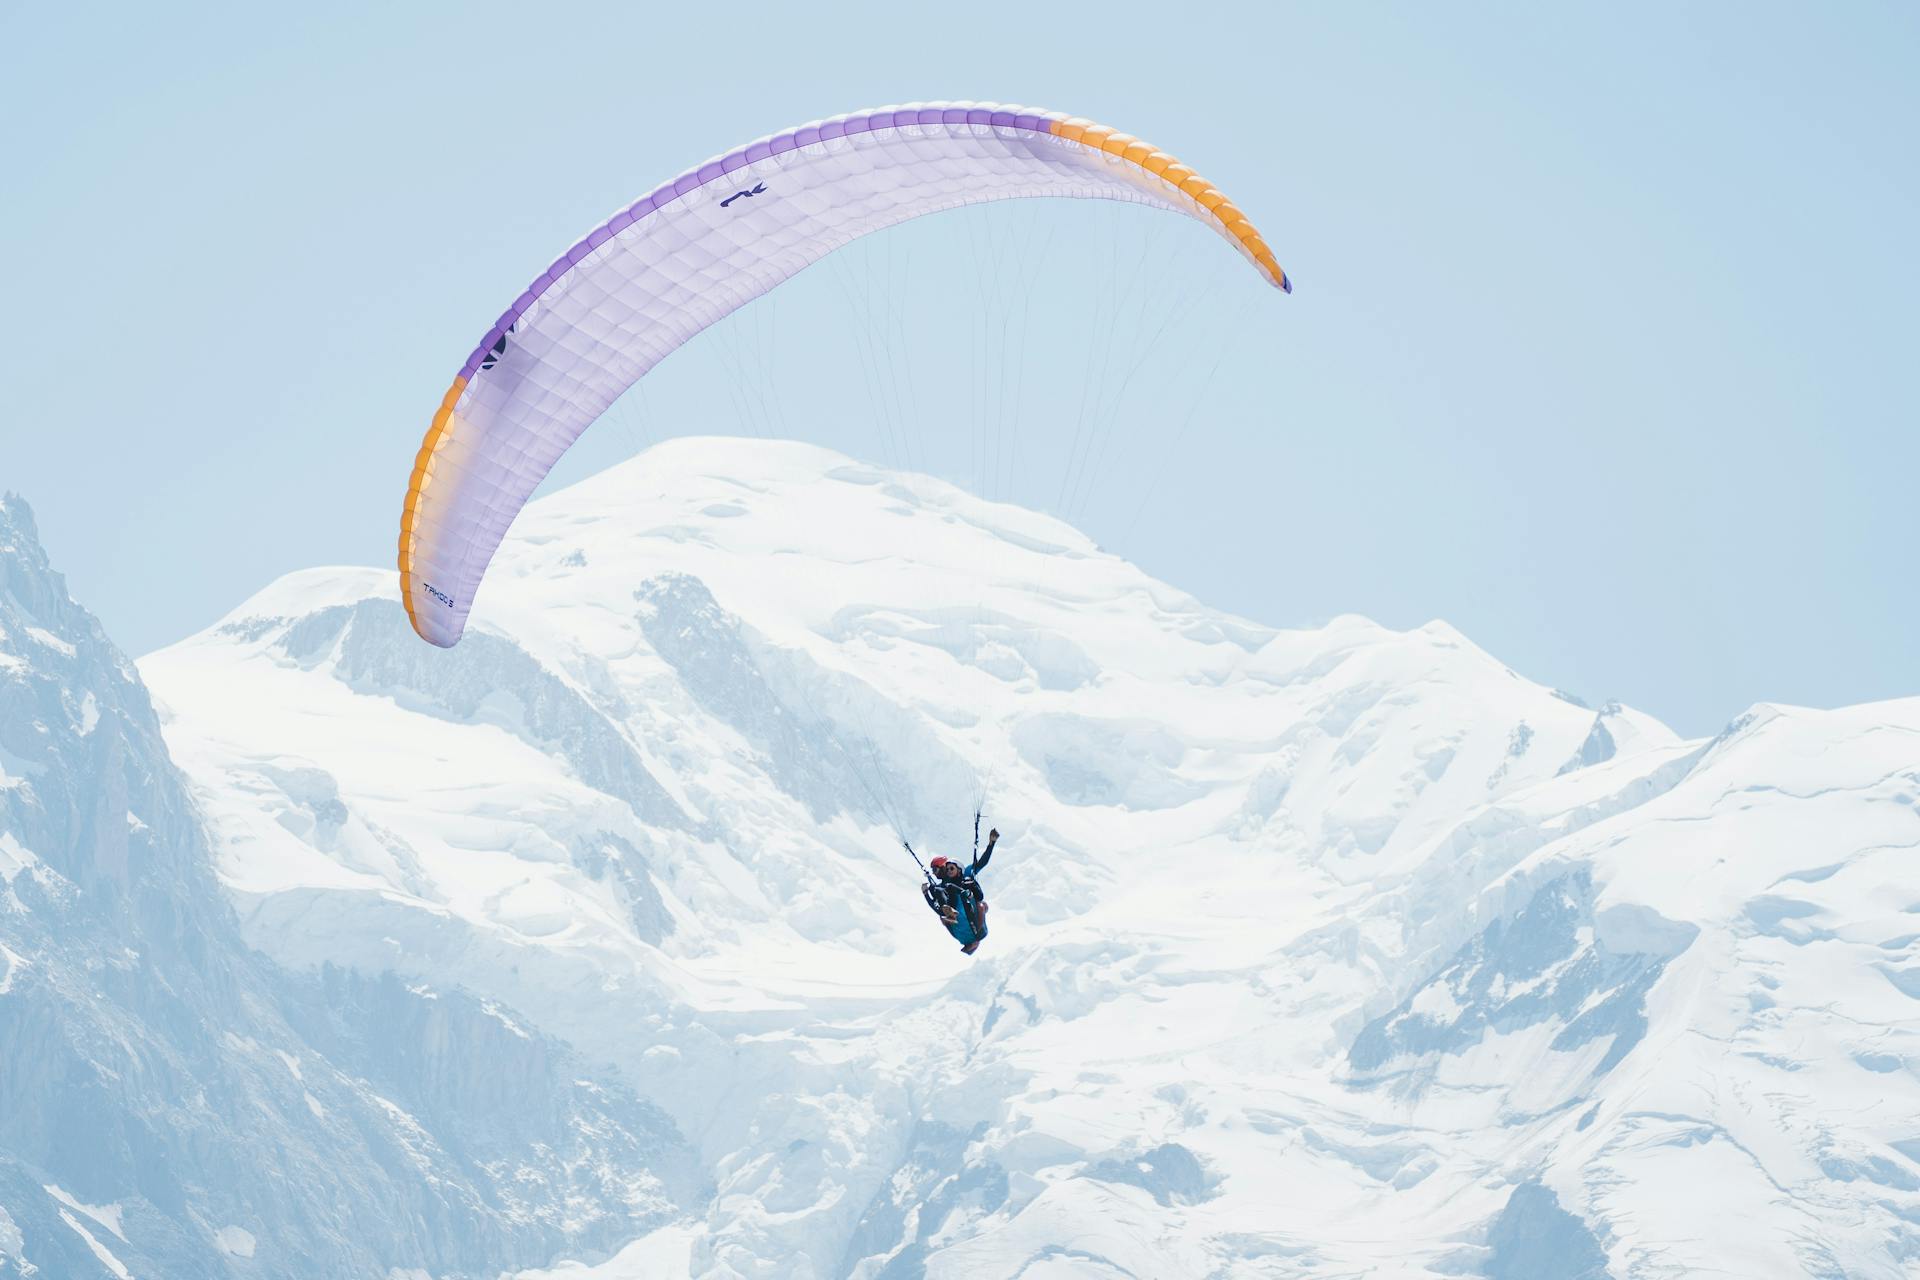 Winter tandem paragliding over snowy mountains in winter